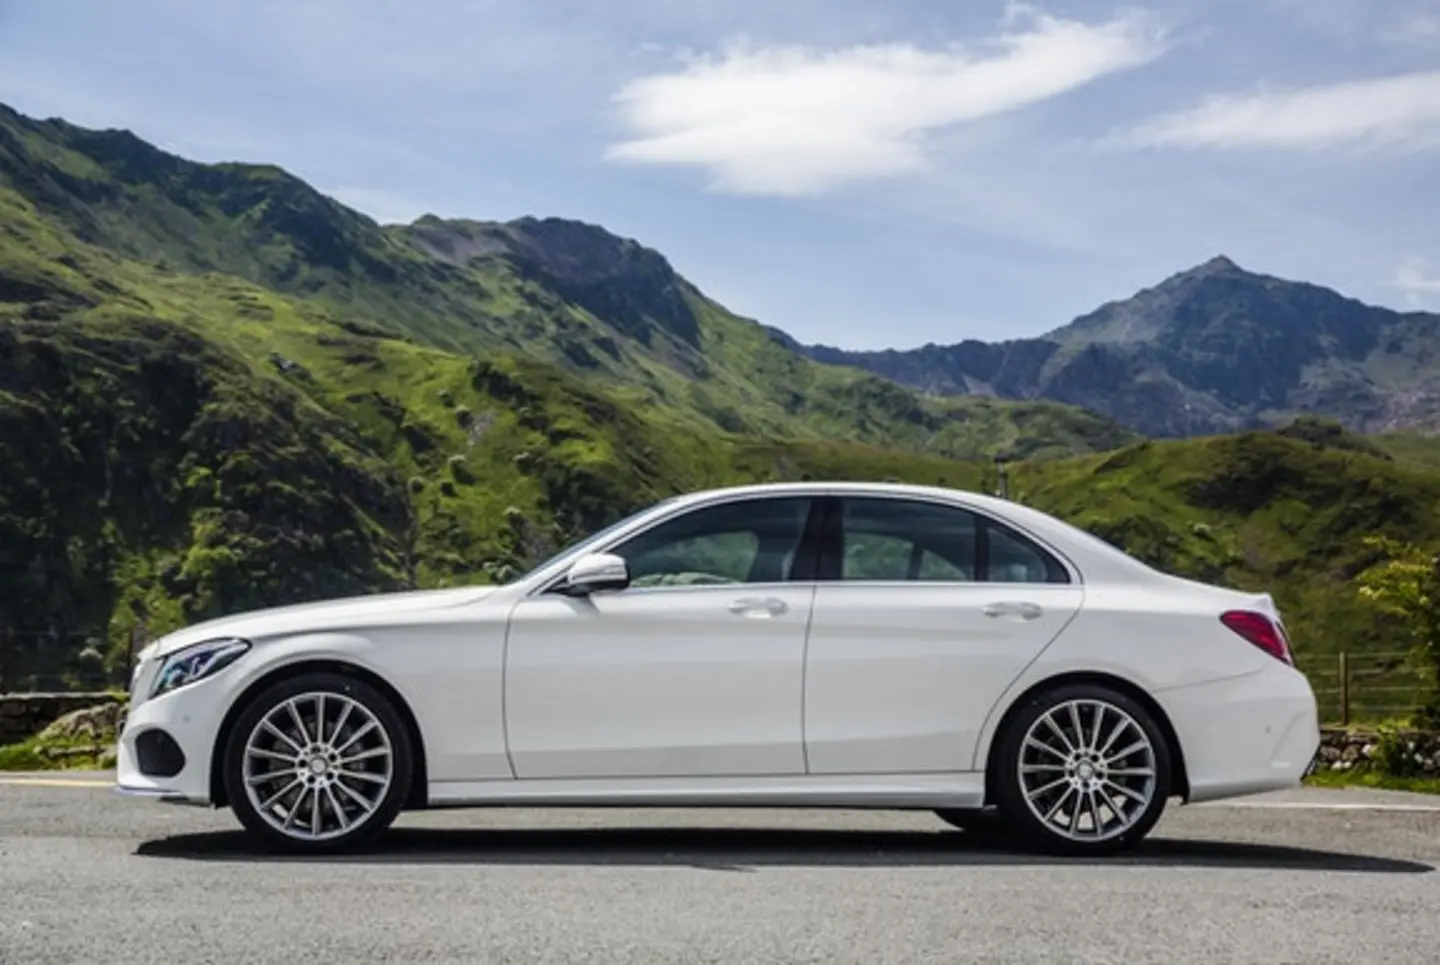 The side exterior of a white Mercedes-Benz C-Class